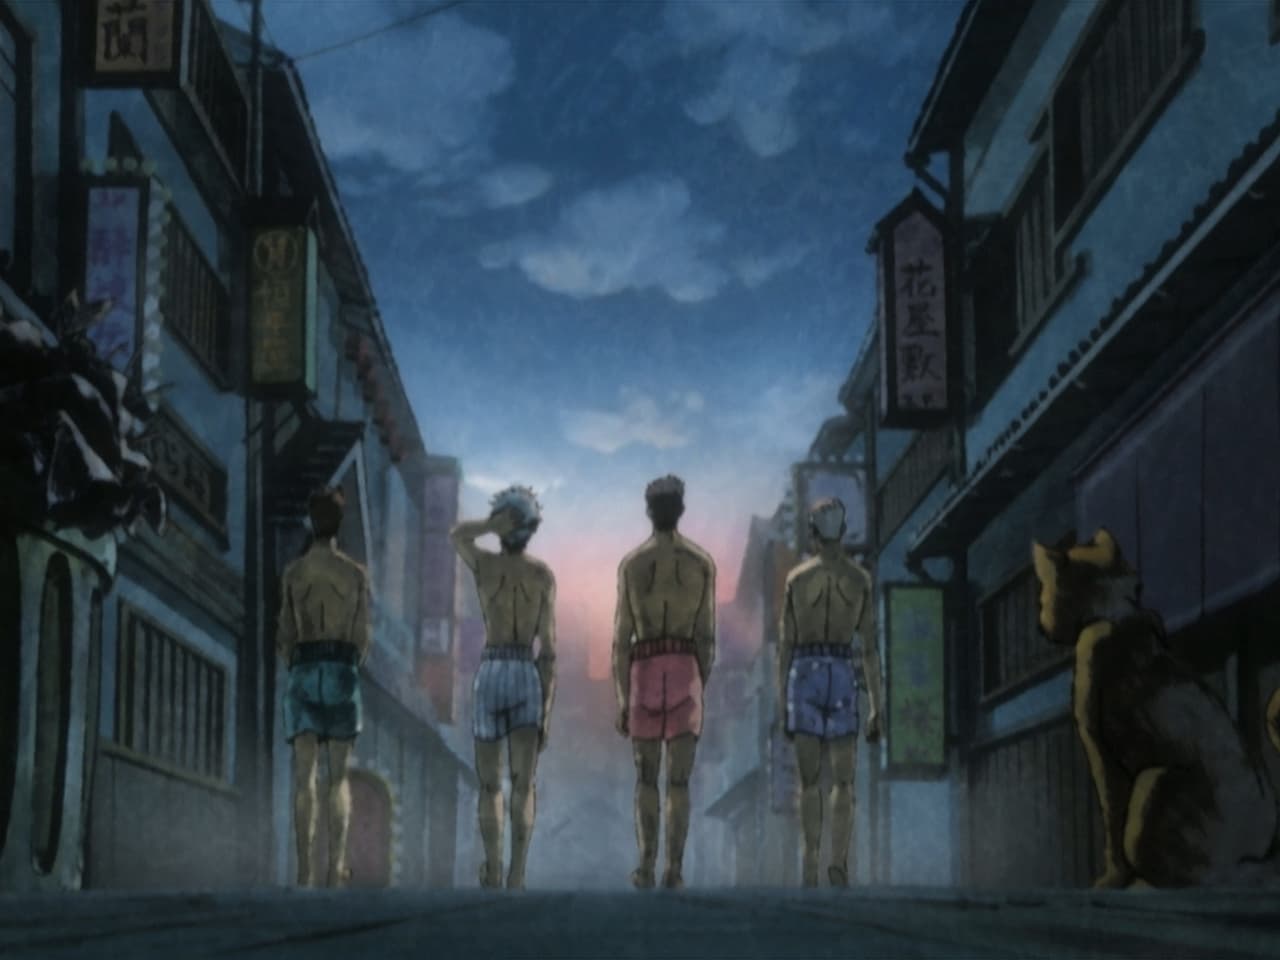 Gintama - Season 1 Episode 46 : Adults Only. We Wouldn’t Want Anyone Immature in Here